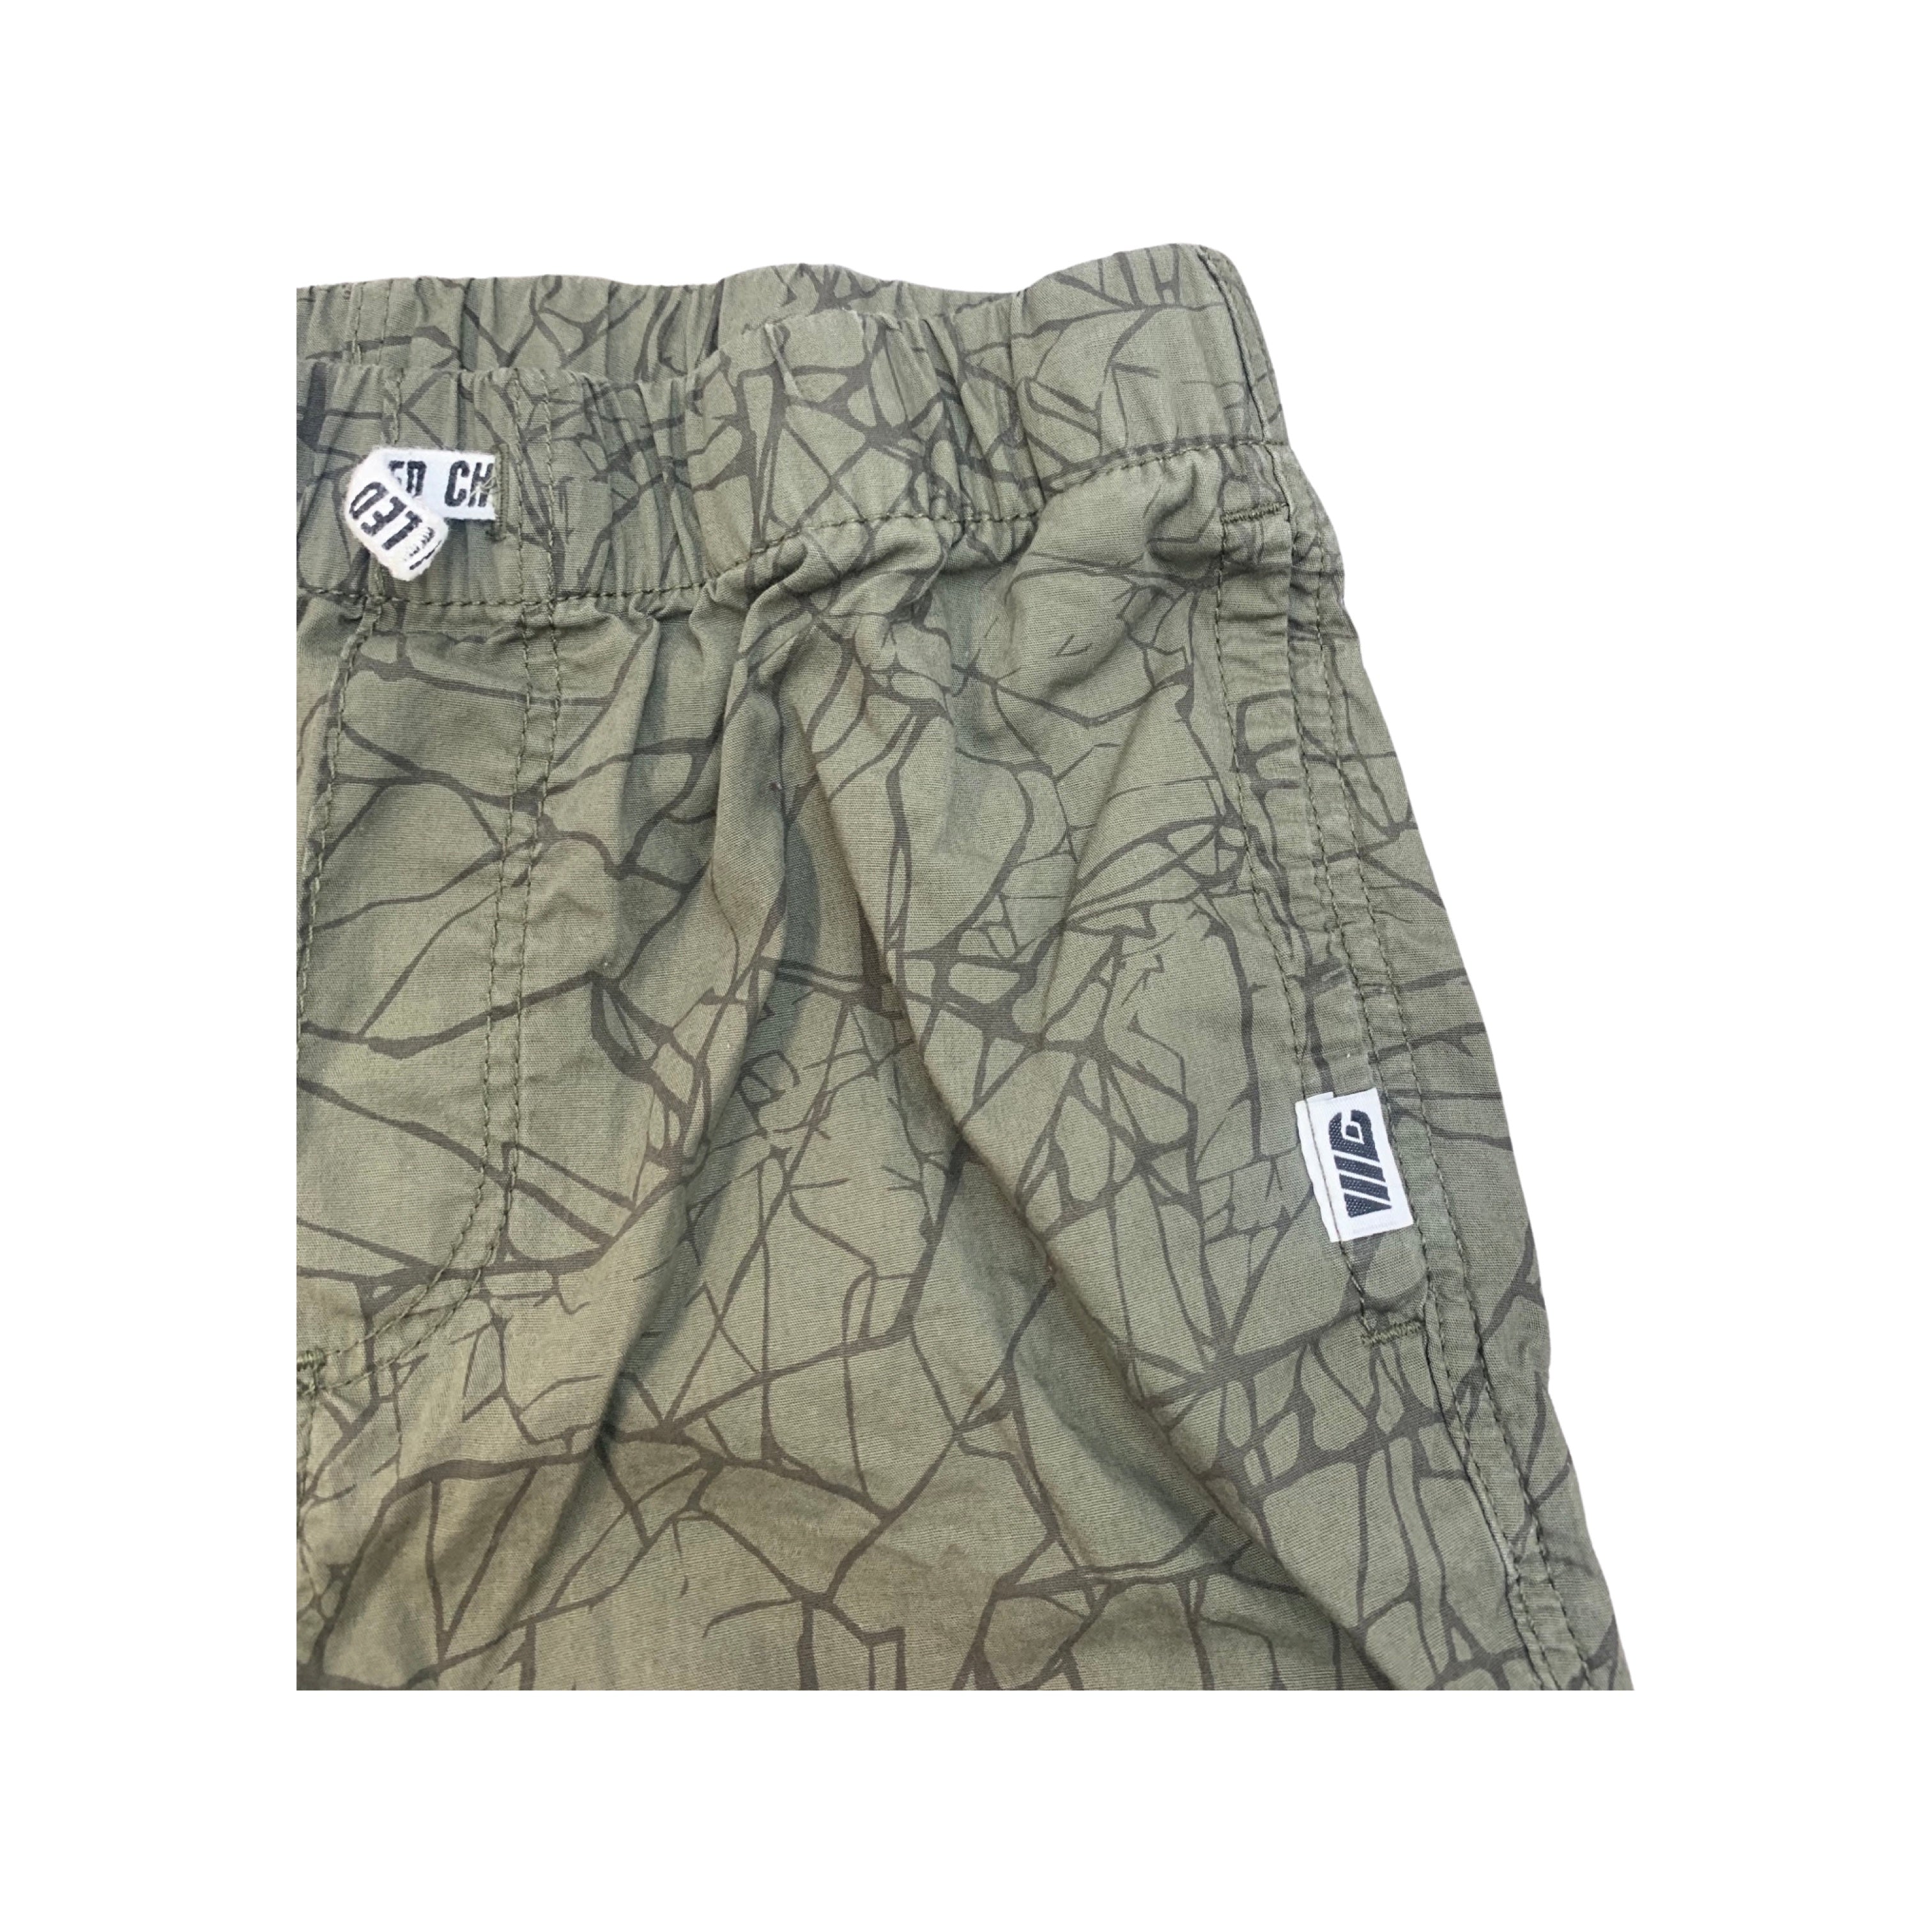 H&M Patterned Shorts Boys 10-11 Years